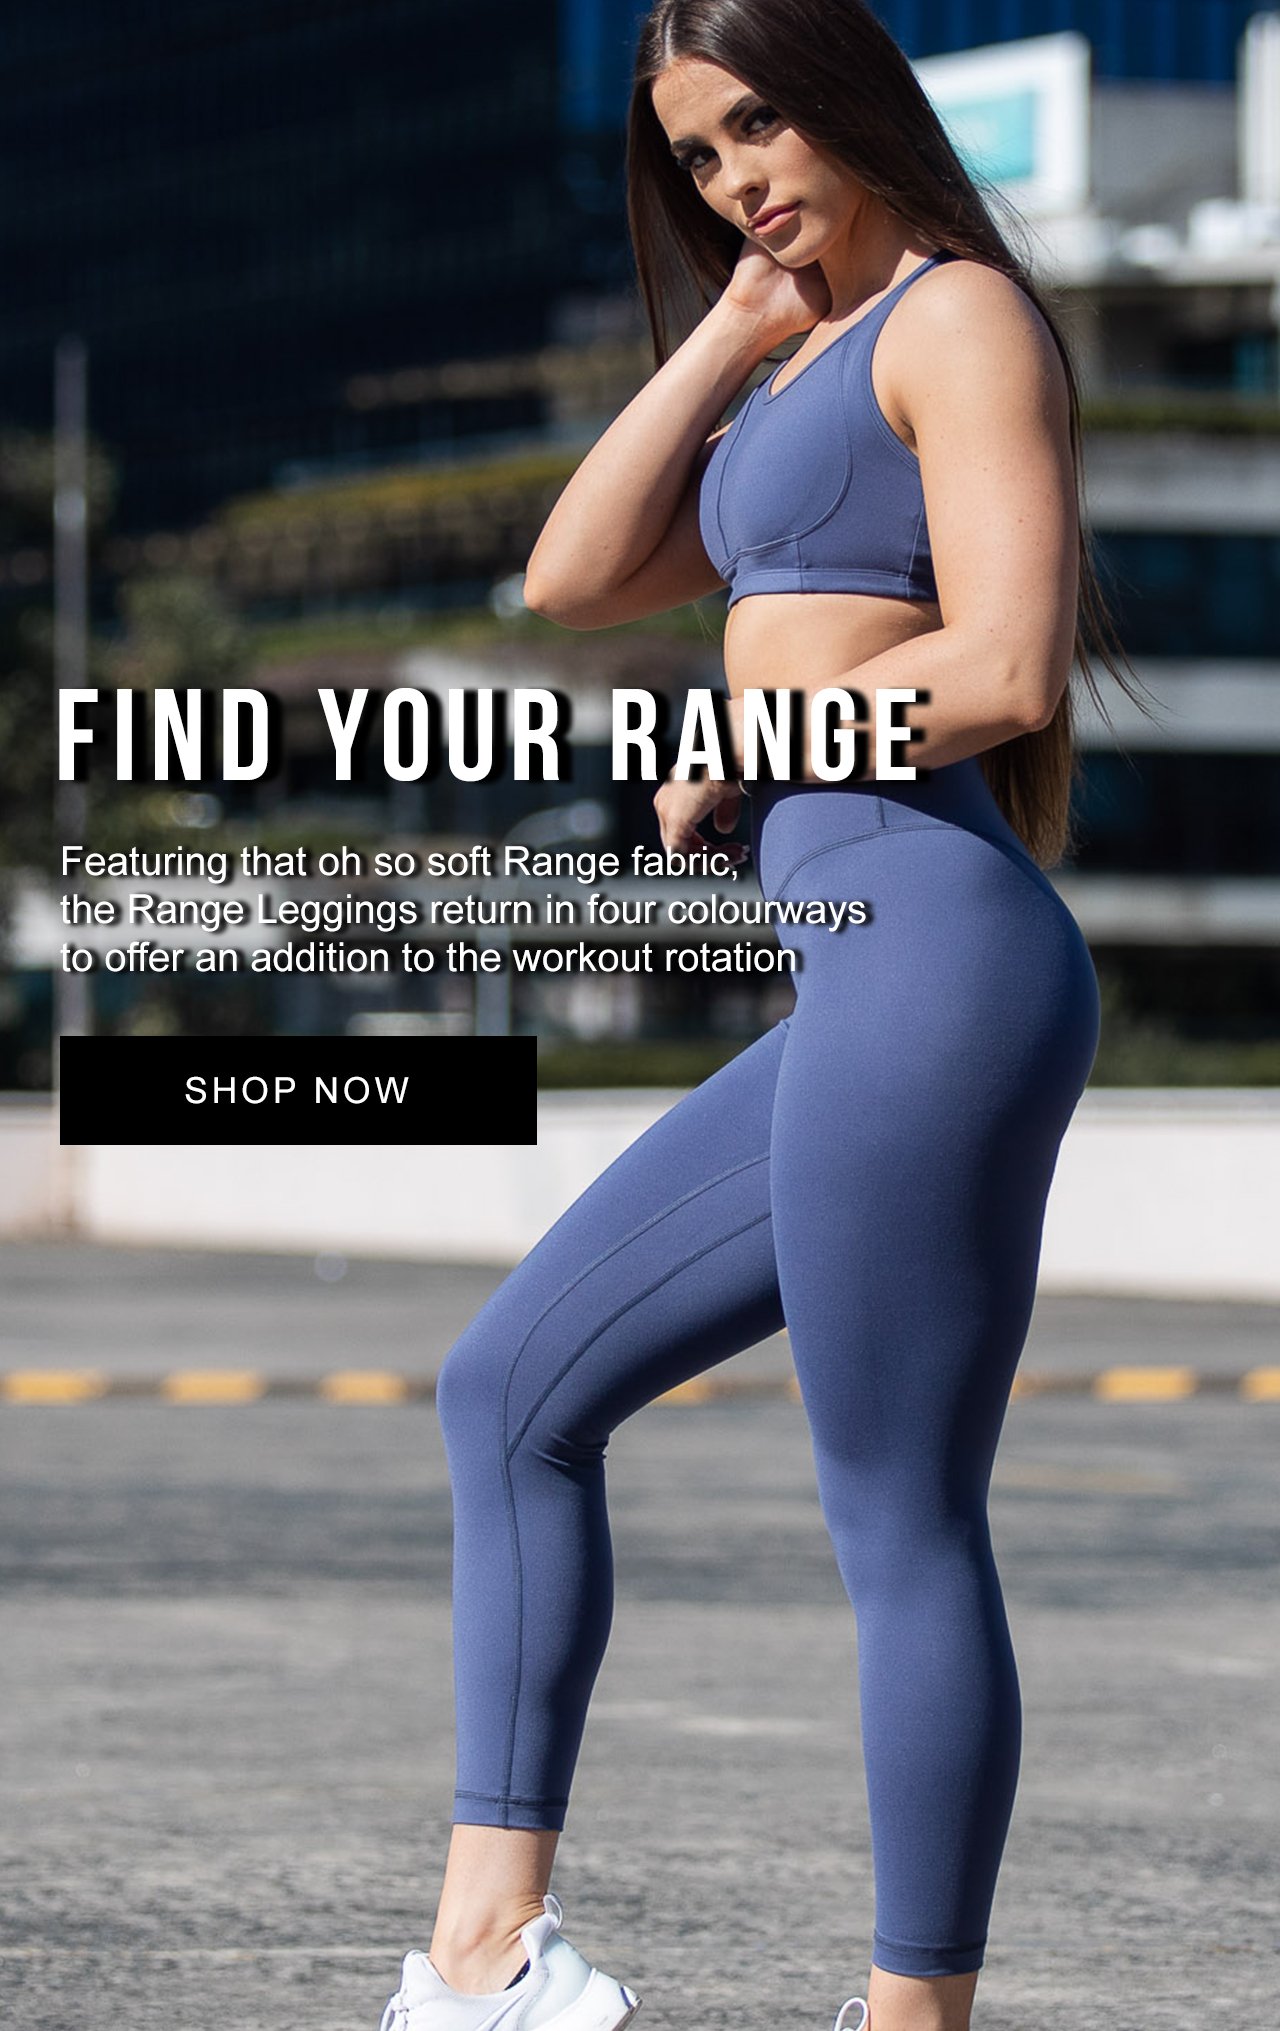 ECHT: They're Back: RANGE Leggings and more!